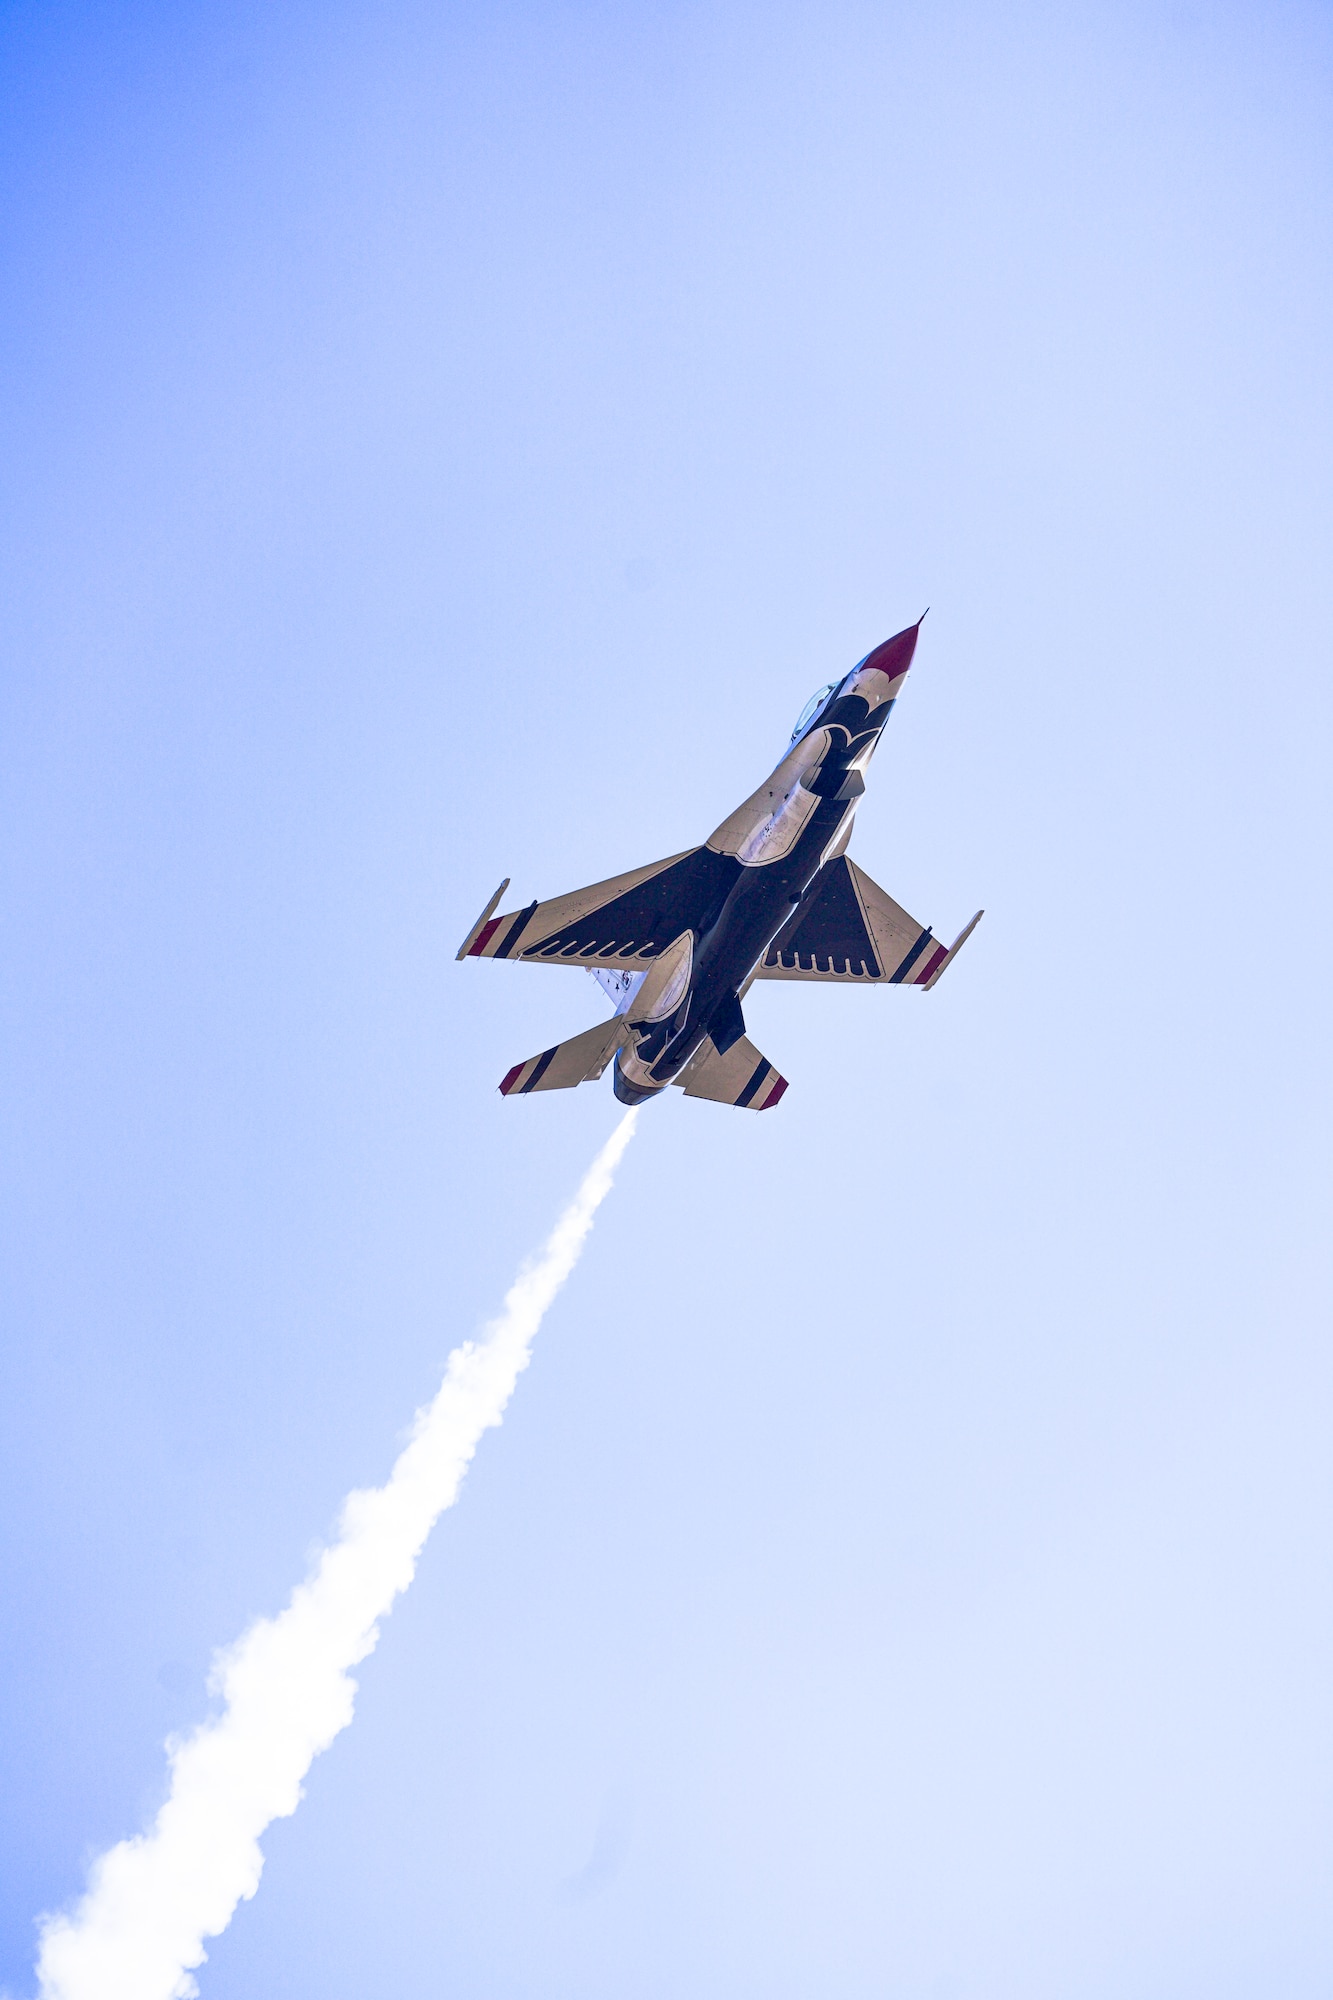 The United States Air Force Air Demonstration team “Thunderbirds” execute a carefully choreographed demonstration at the California Capital Air Show Sept. 23, 2023, in Rancho Cordova, California.